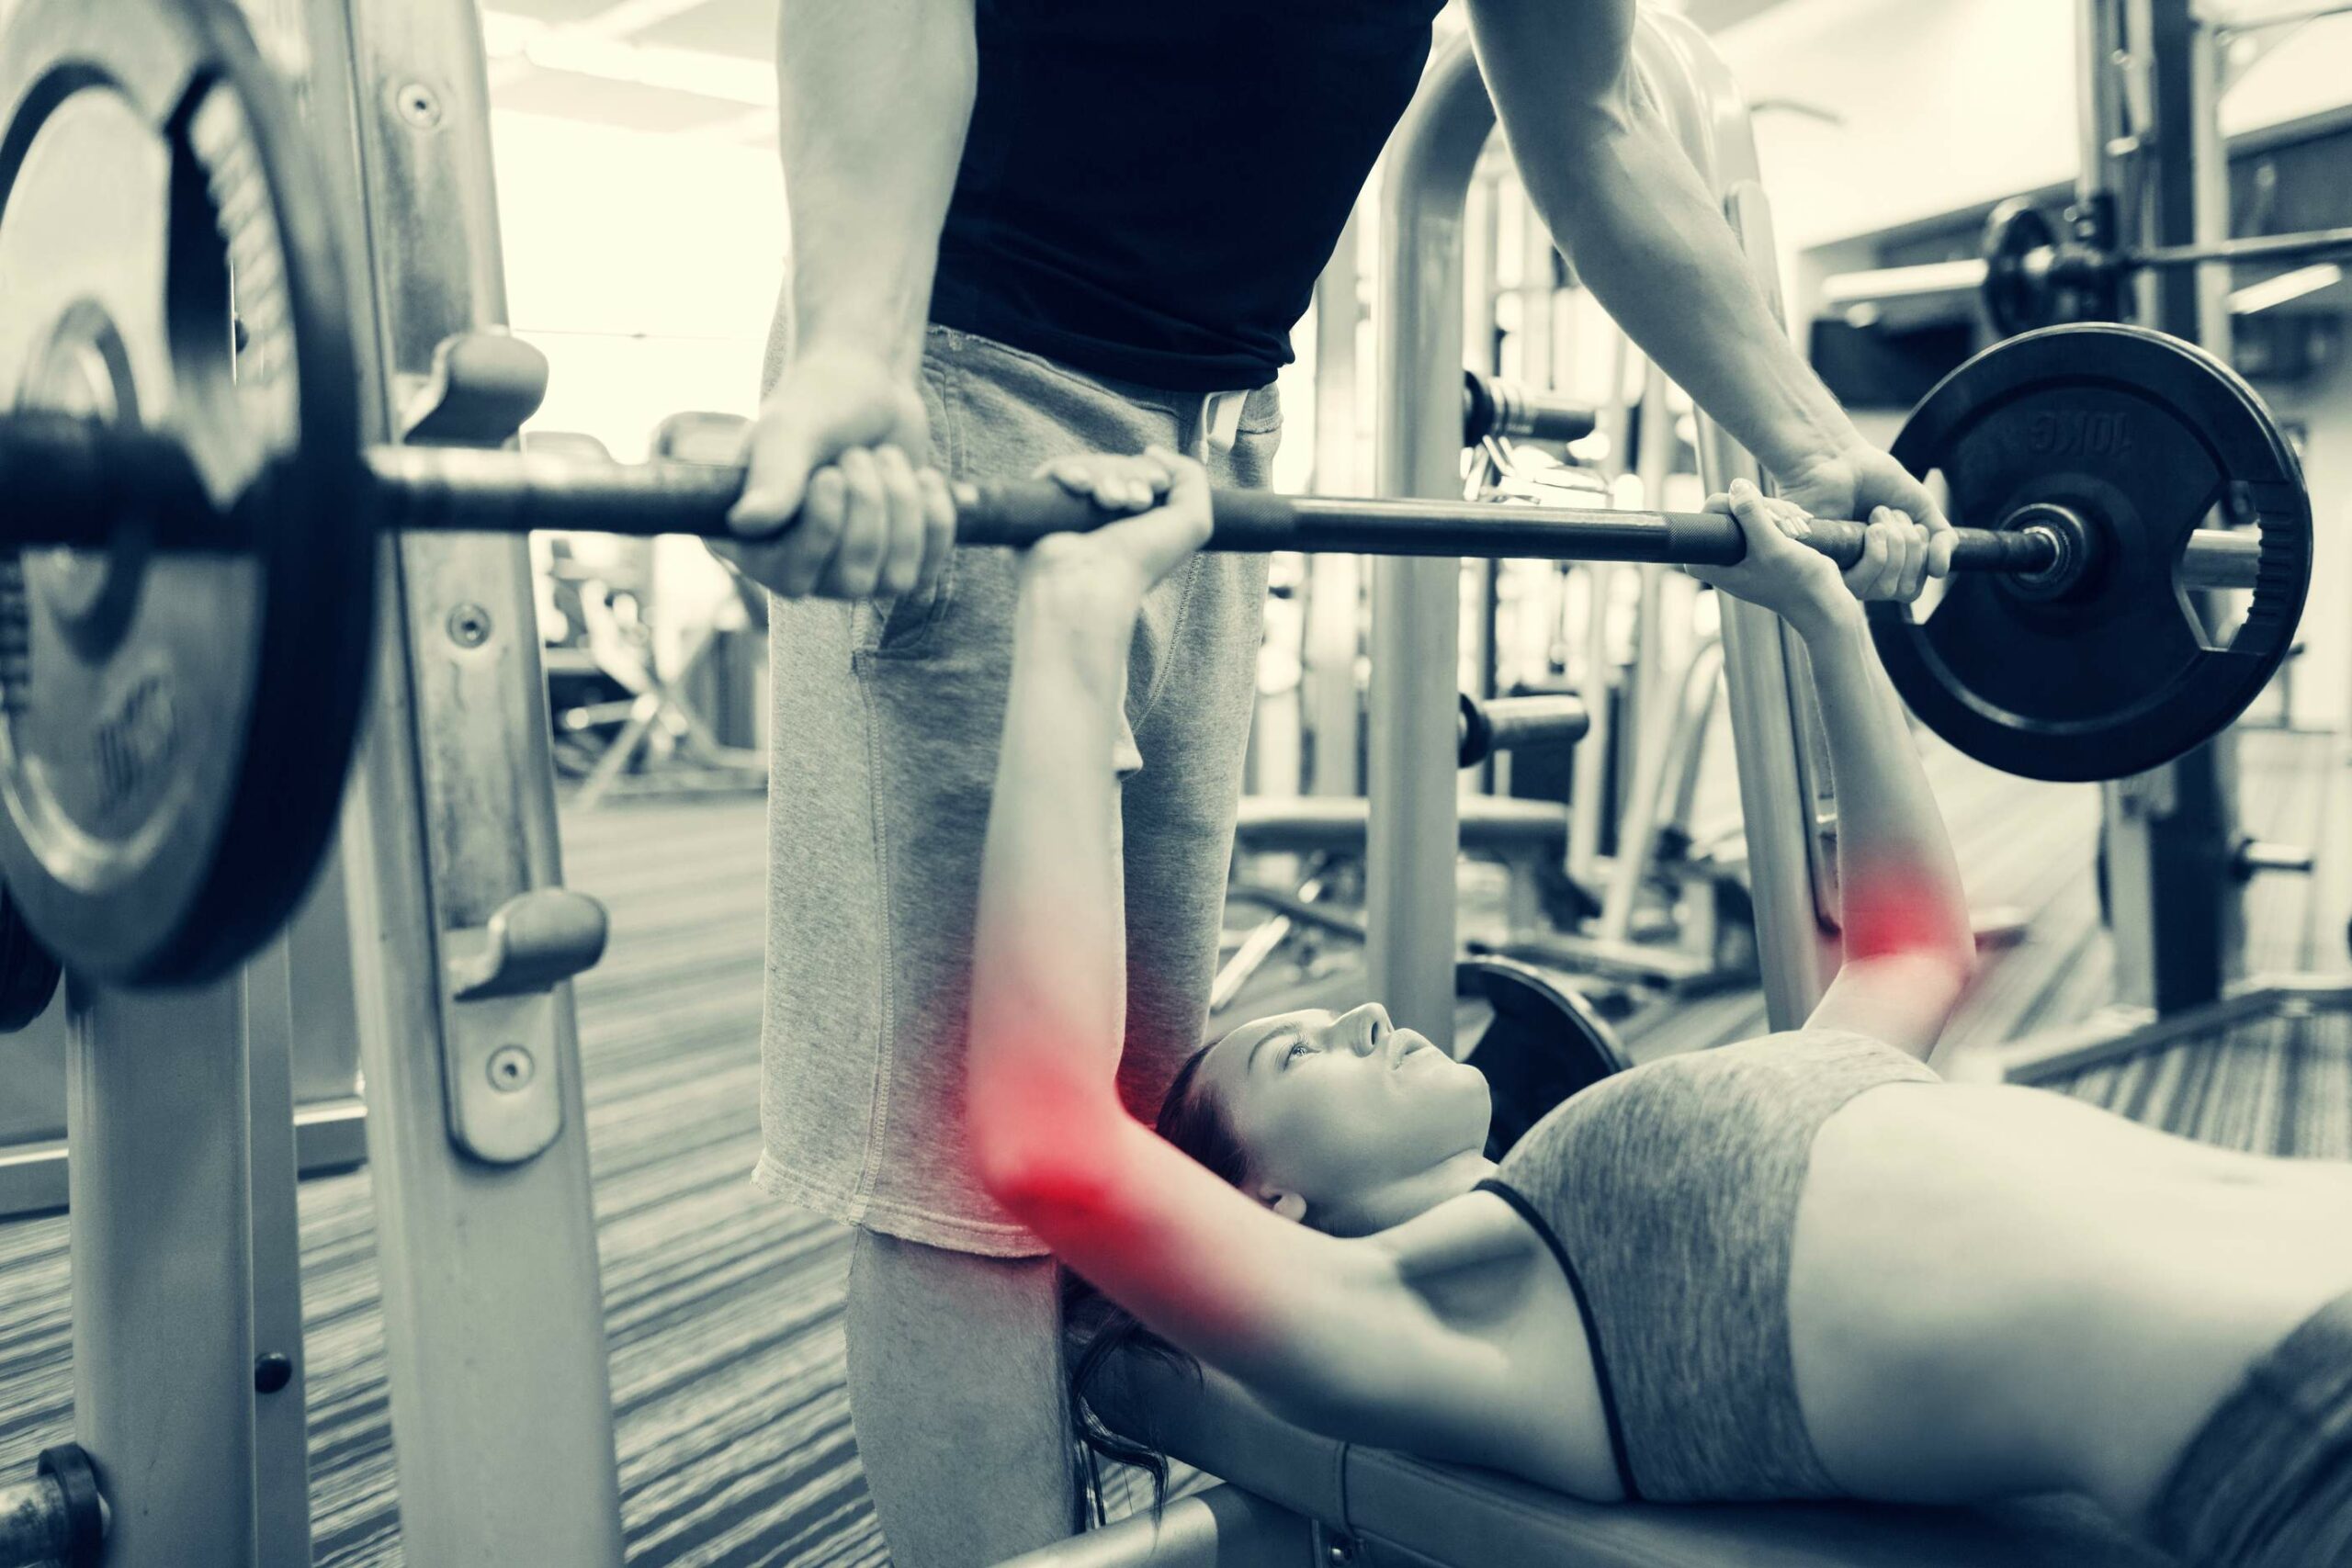 You can effectively prevent sports injuries with these 6 tips